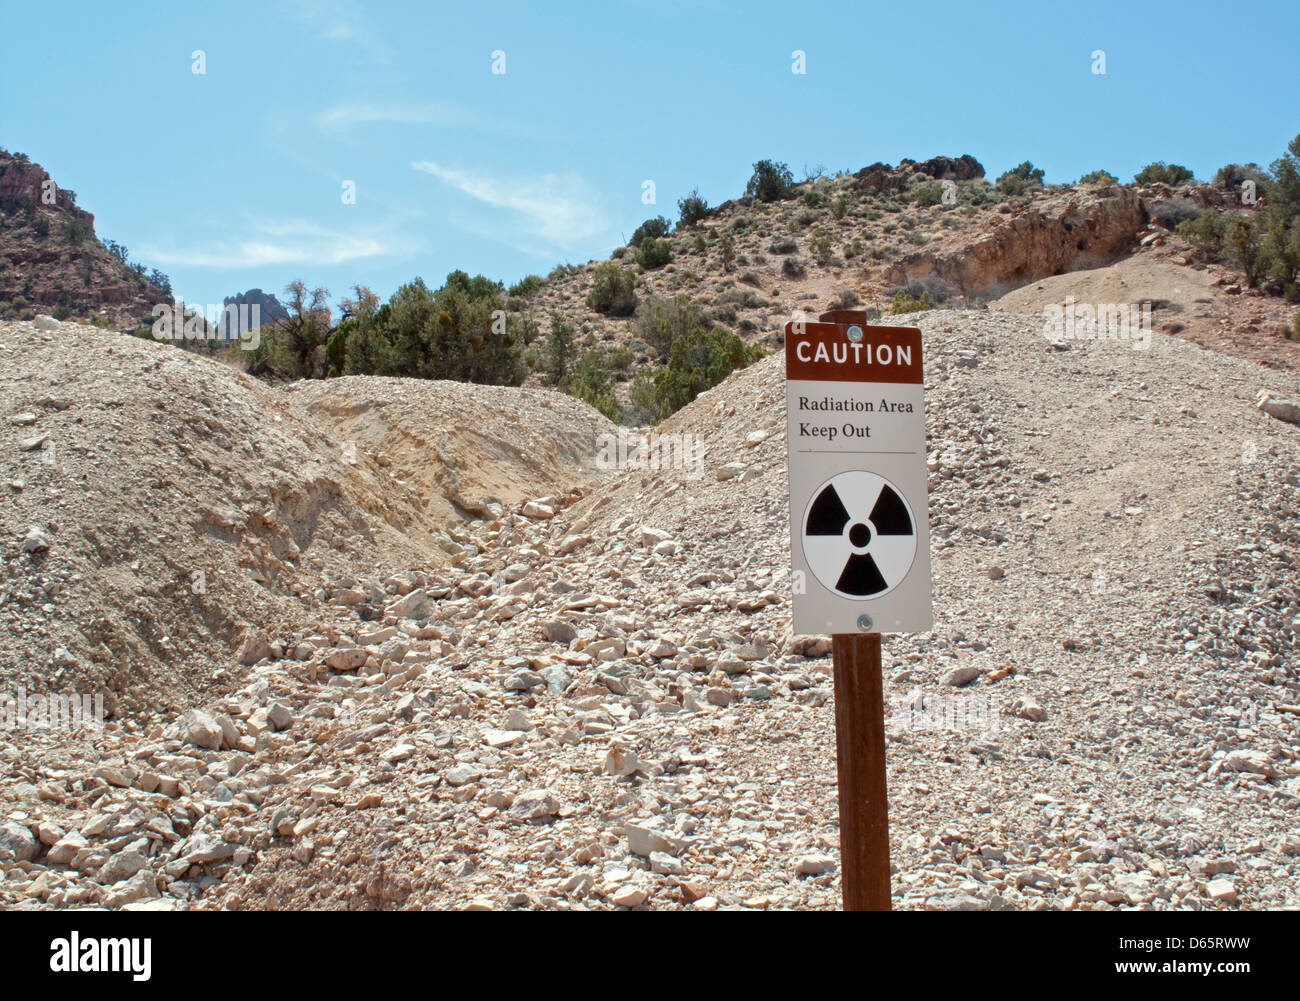 Grand Canyon National Park, Arizona - A sign warns hikers away from an old mine on Horseshoe Mesa due to radiation concerns. Stock Photo